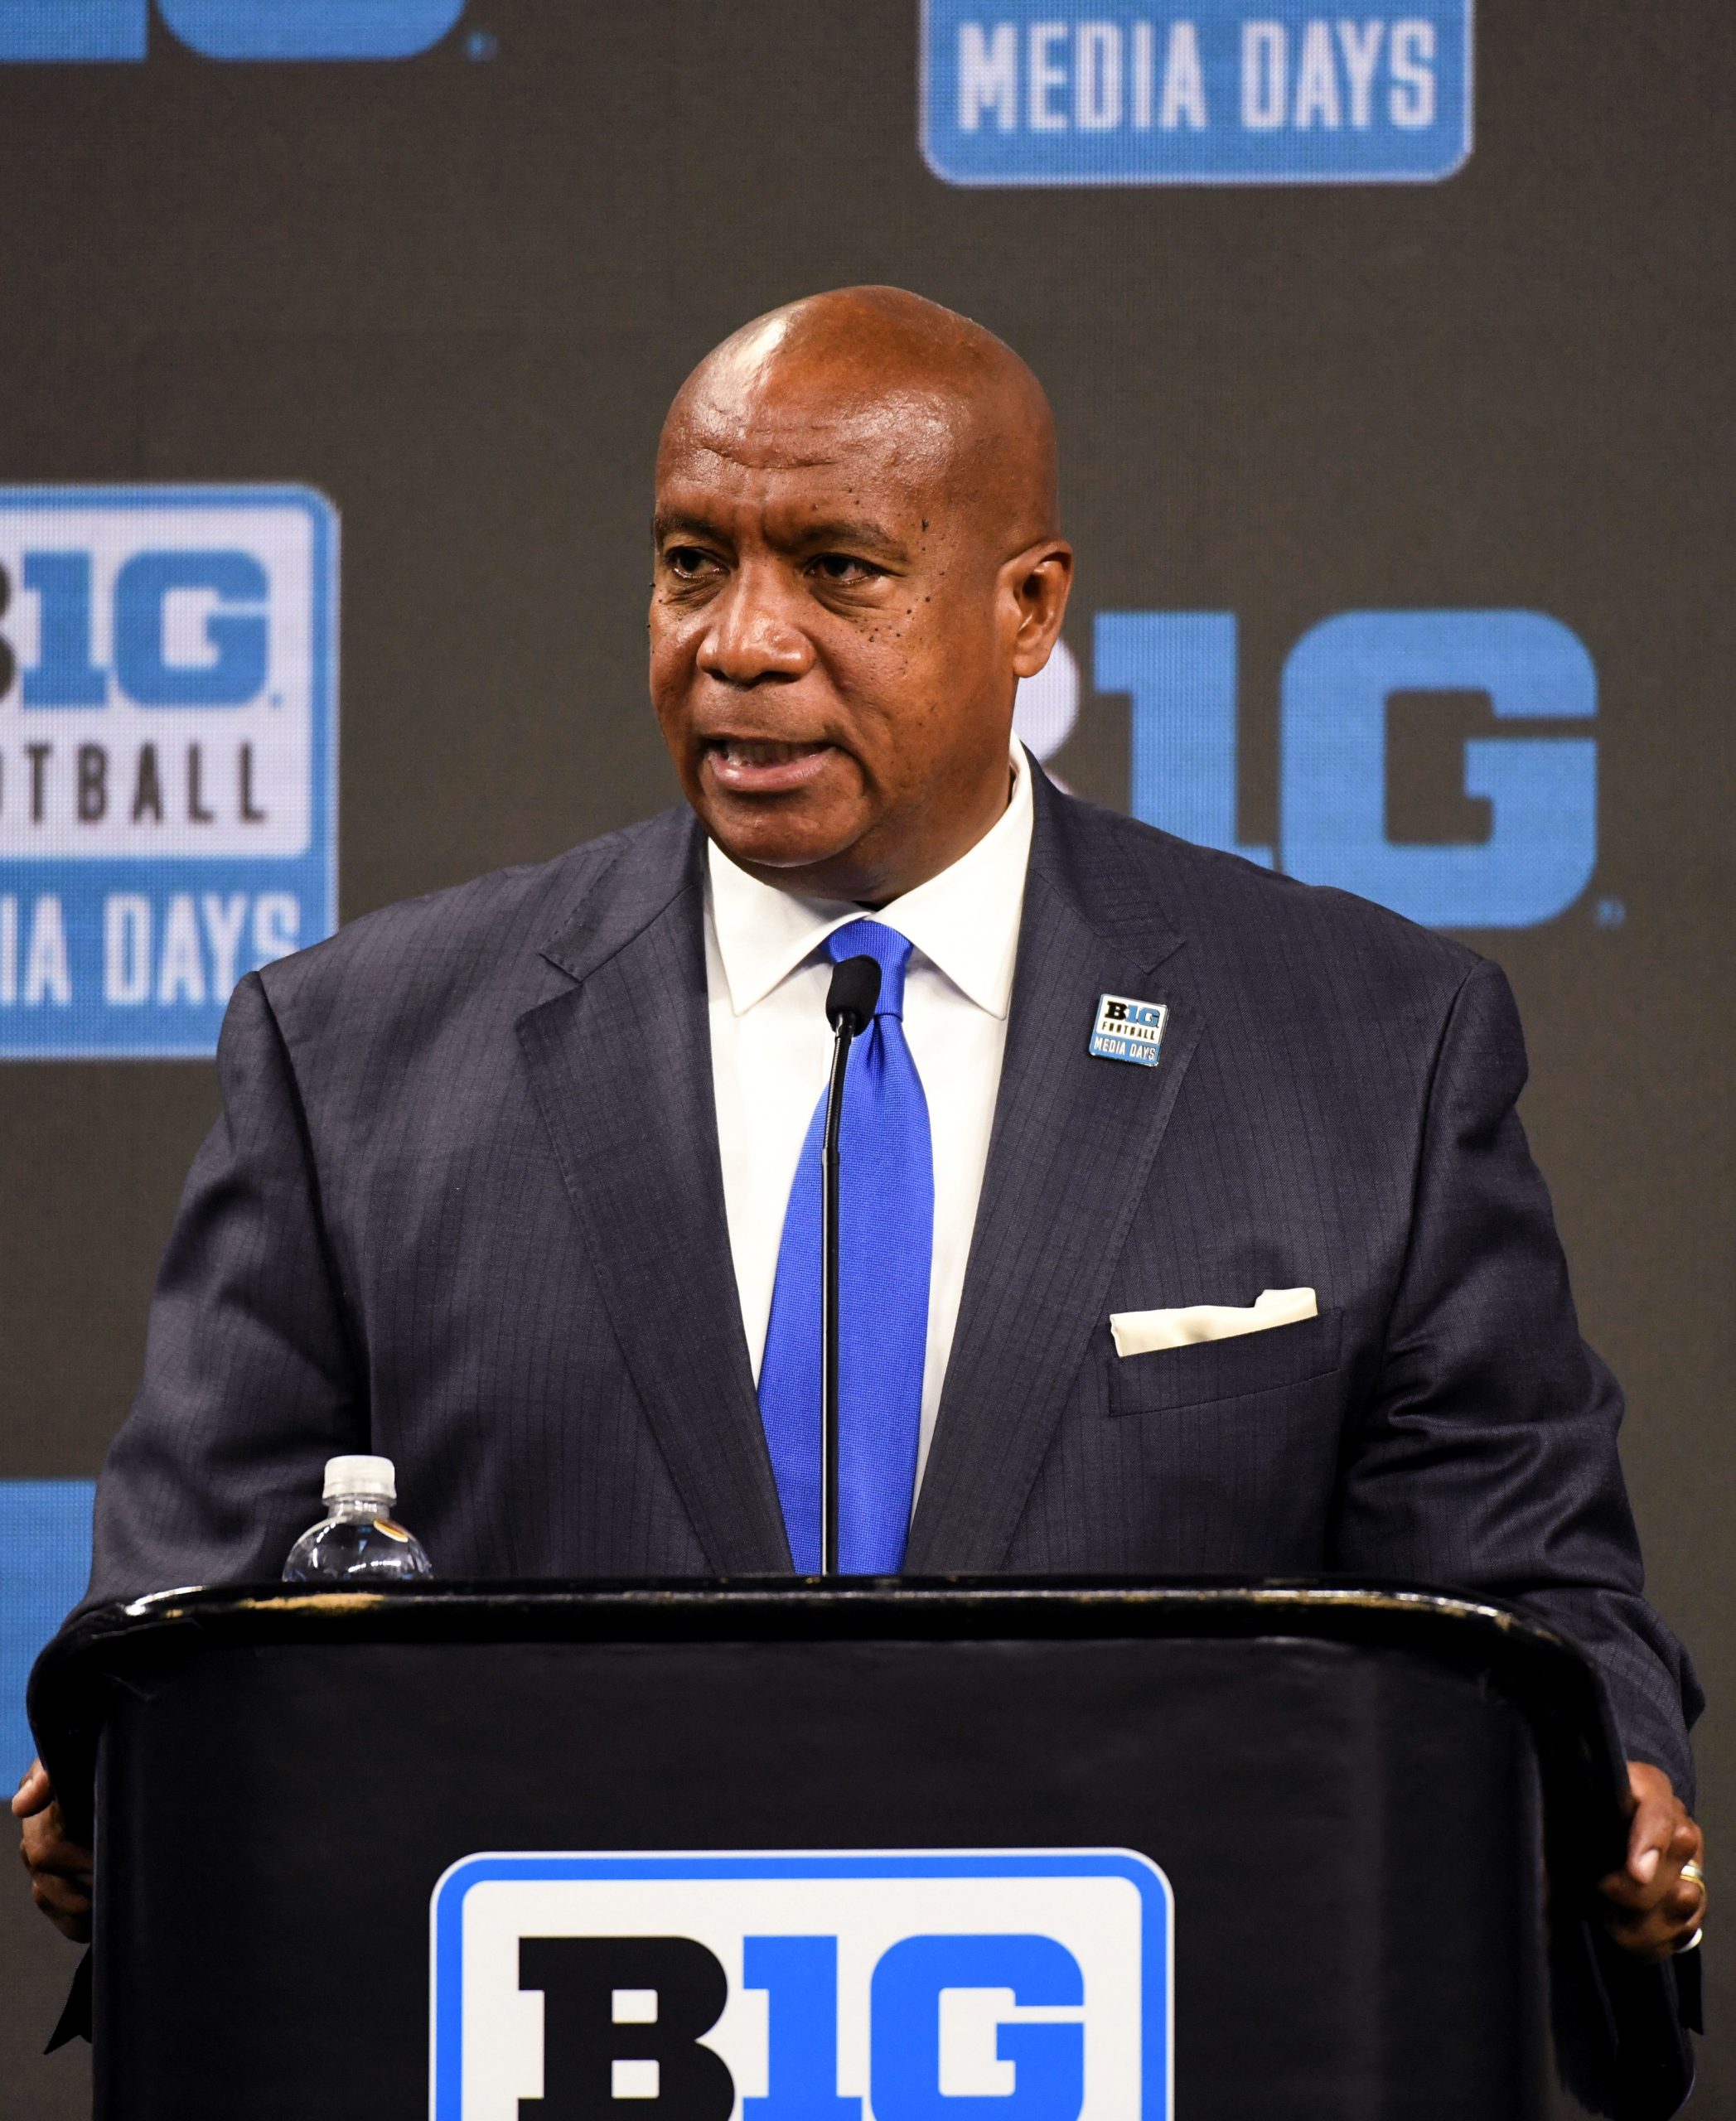 COLUMN: So, Who is Kevin Warren Lobbying For Big Ten To Make Bold Expansion Moves? Probably His 14 (And Future 16) League Bosses